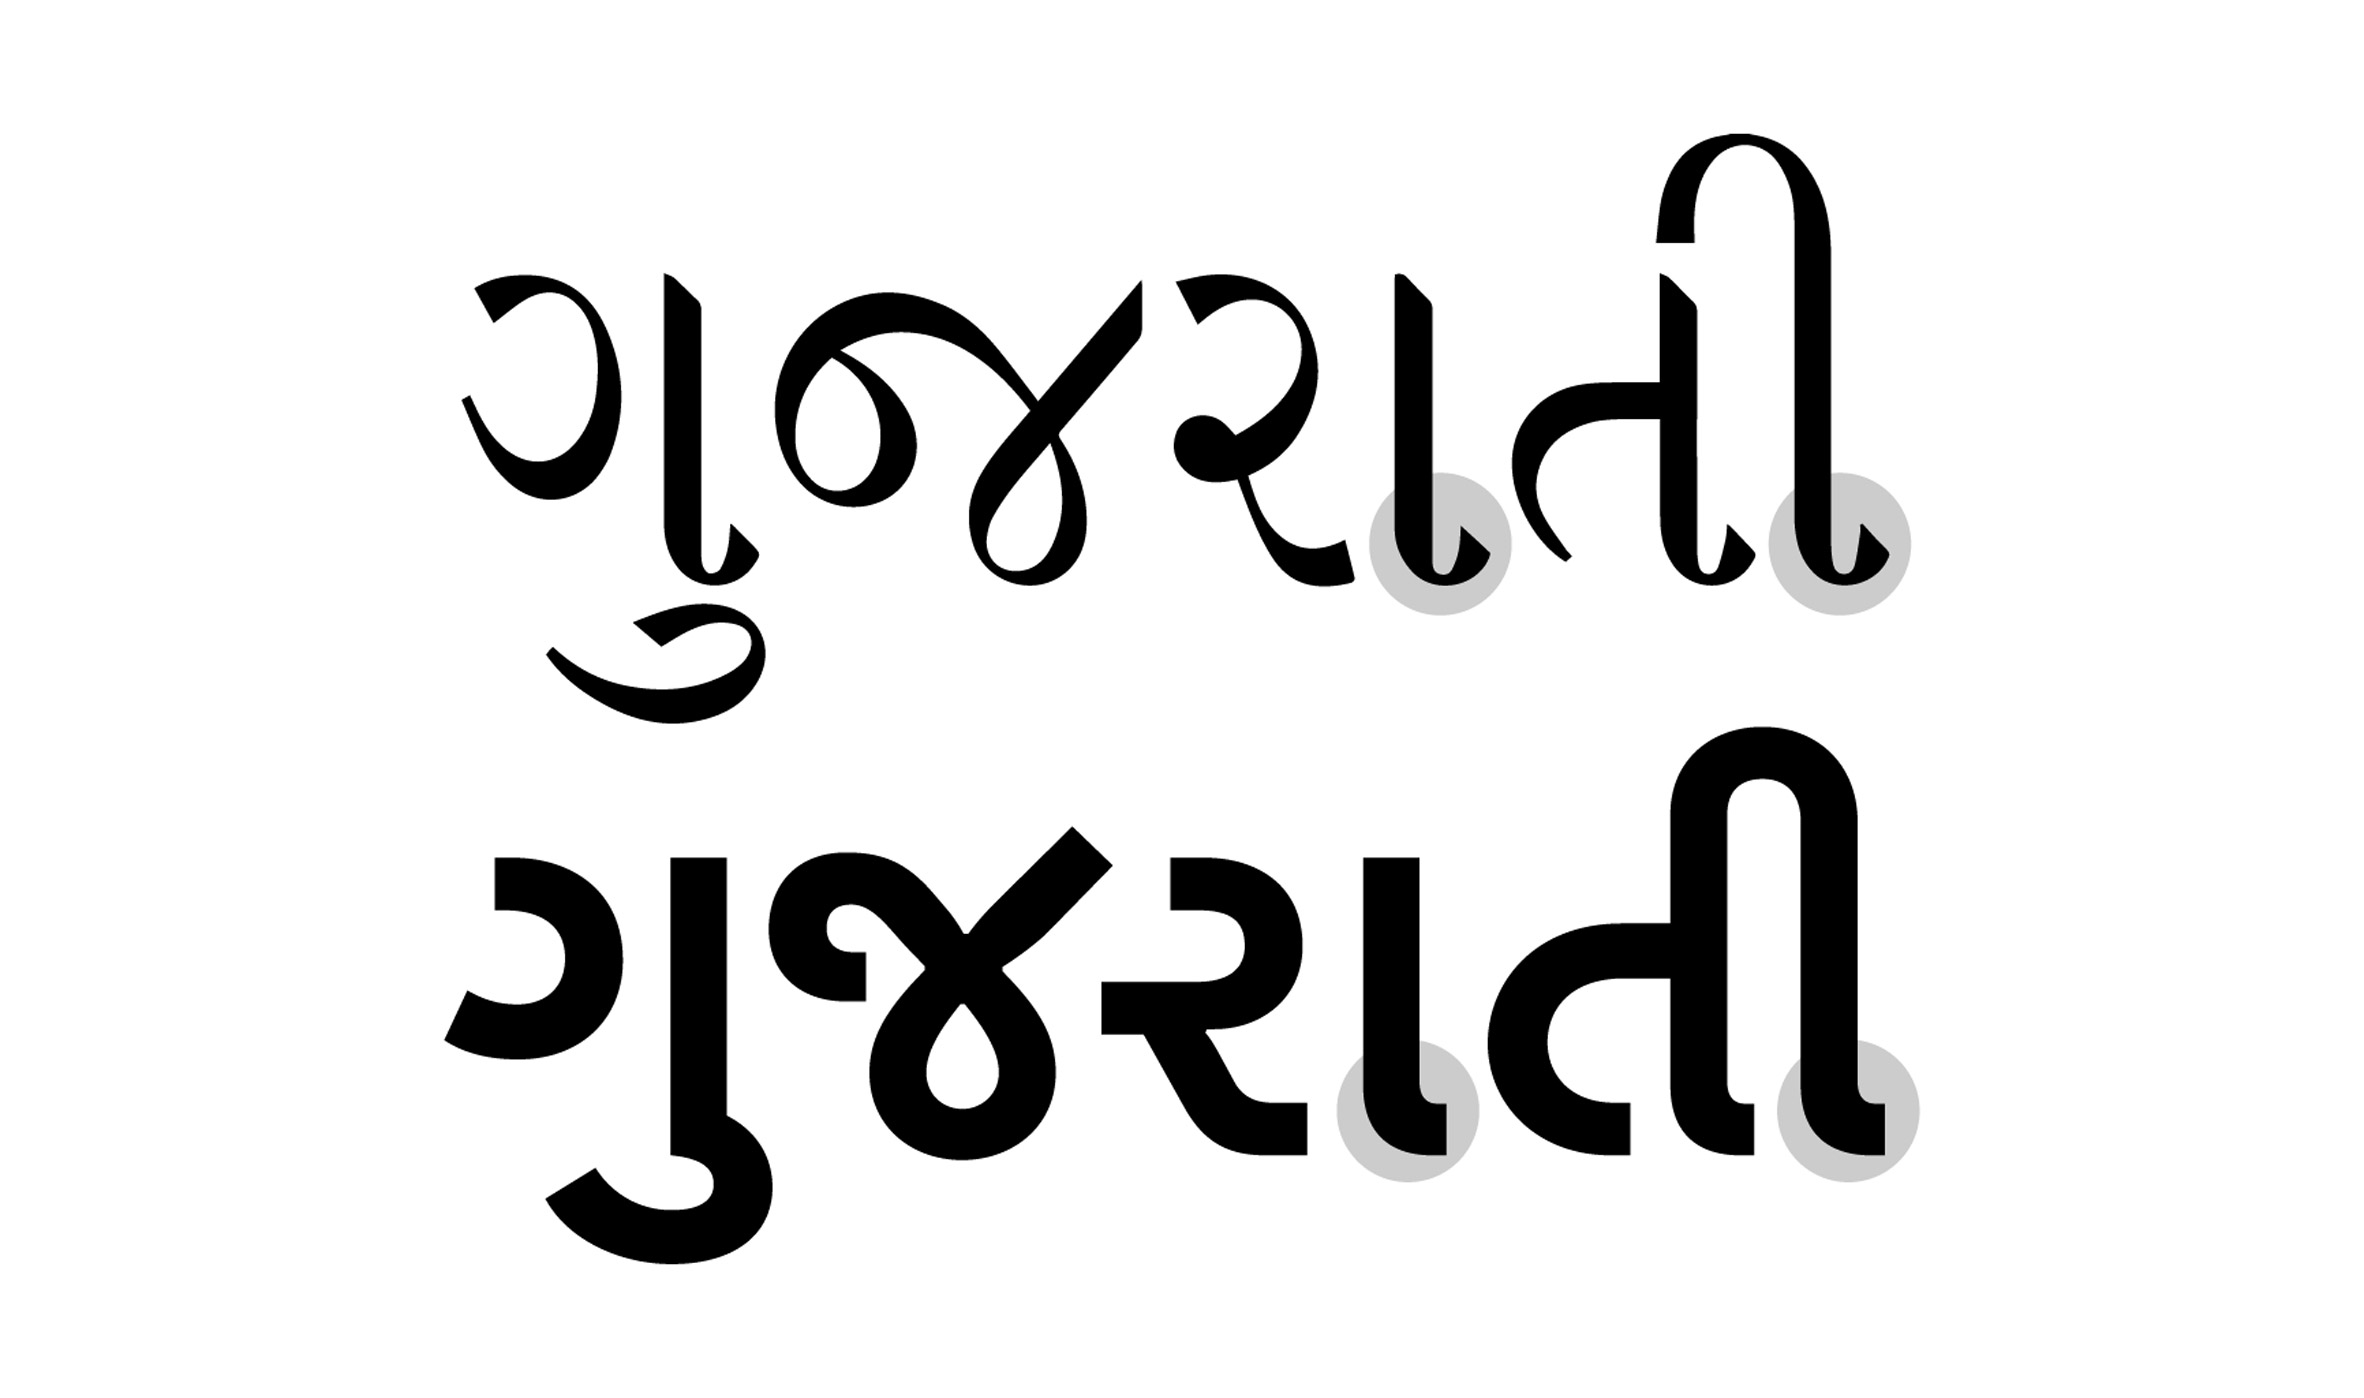 Oli Grotesk is a modern typeface that is translated into traditional Indian scripts